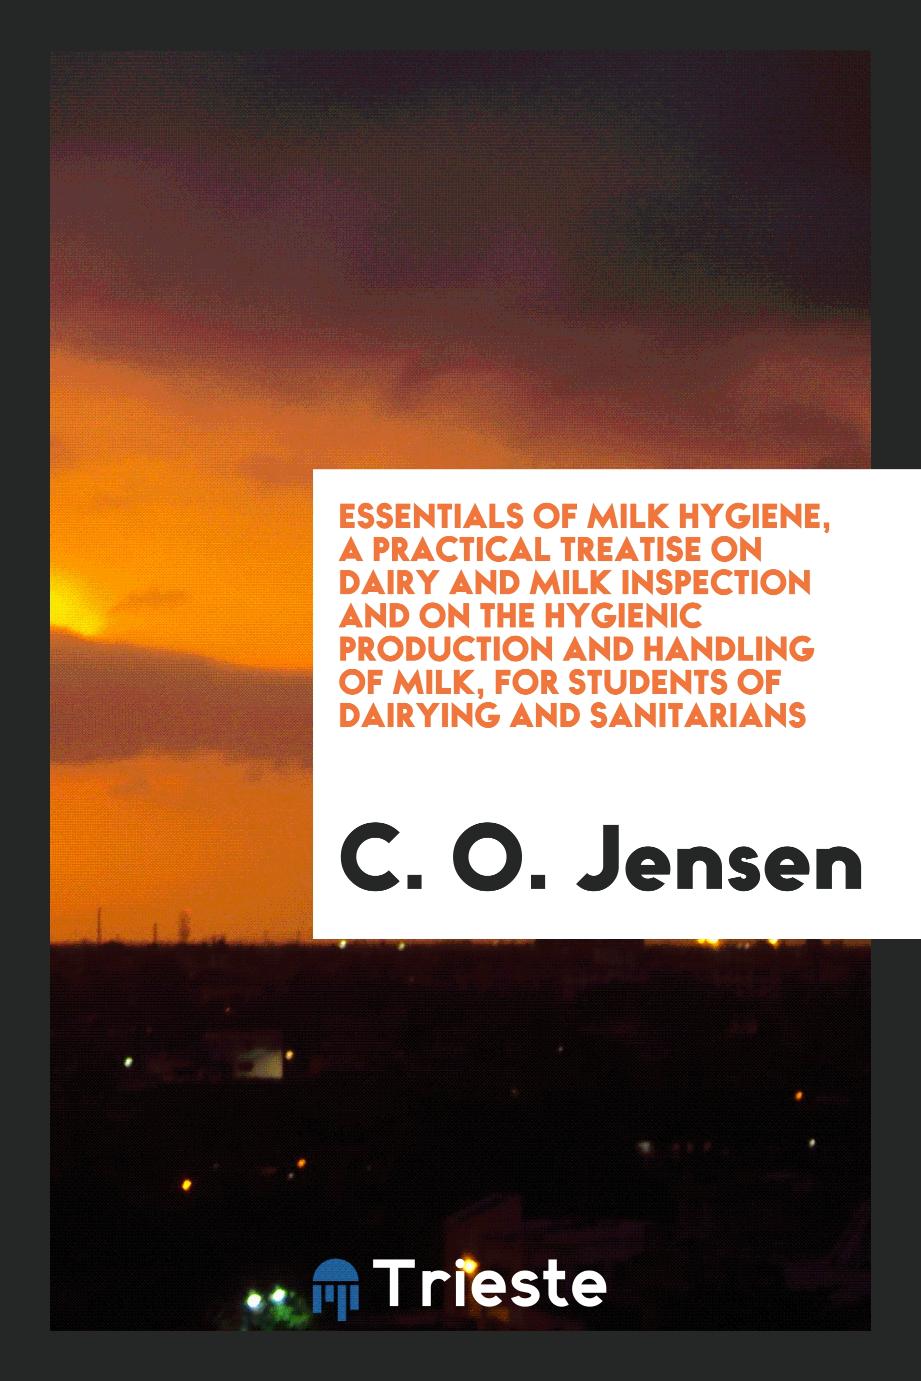 Essentials of milk hygiene, a practical treatise on dairy and milk inspection and on the hygienic production and handling of milk, for students of dairying and sanitarians